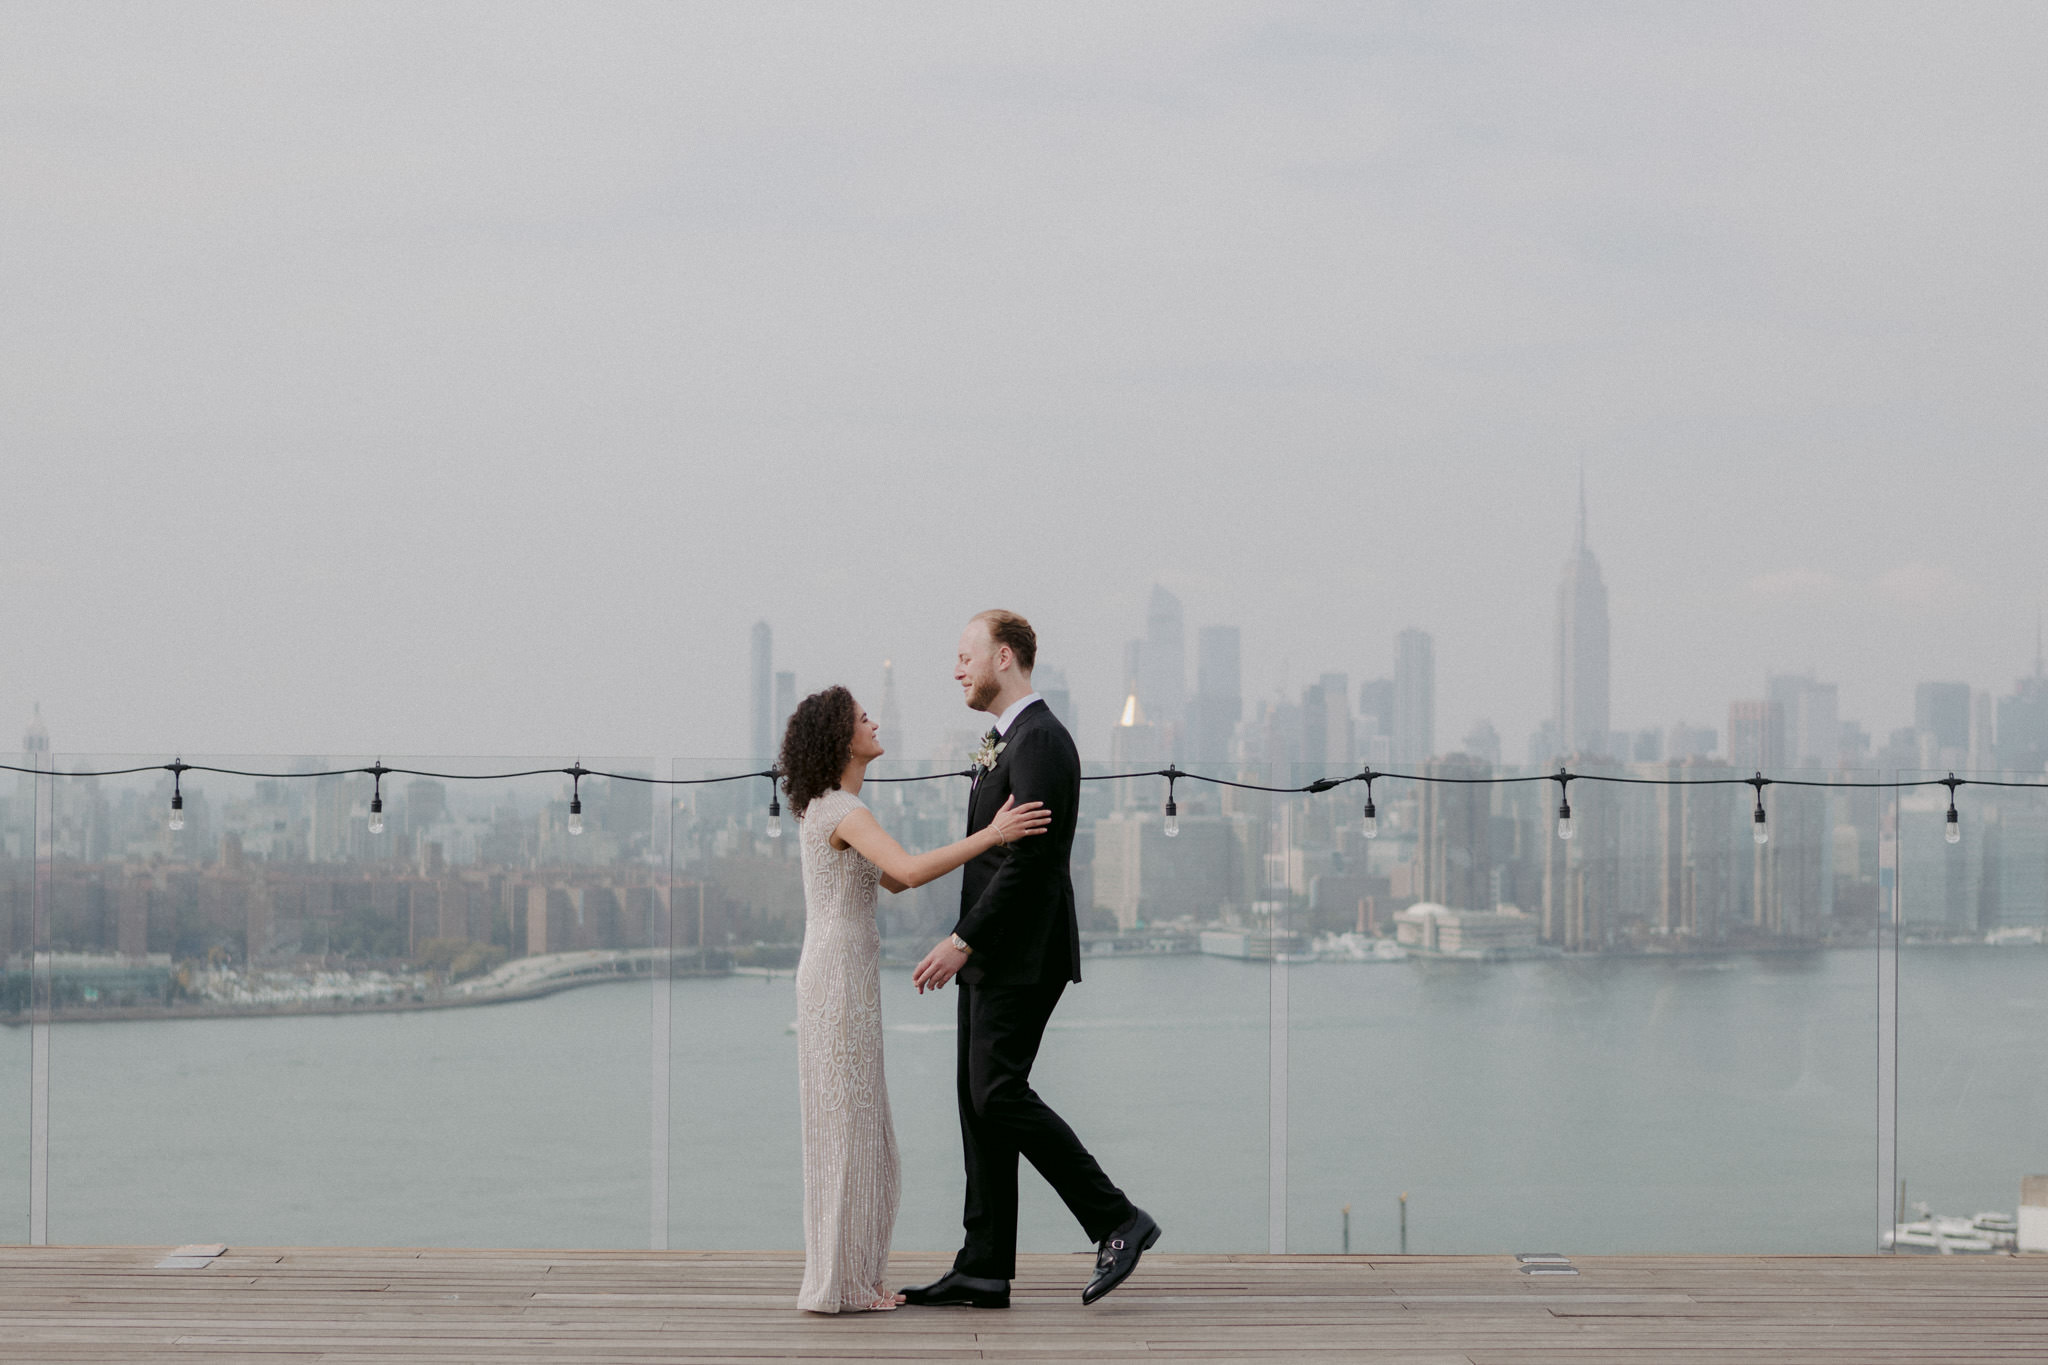 A couple embraces during their first look on the rooftop at the Willam Vale, wedding venue